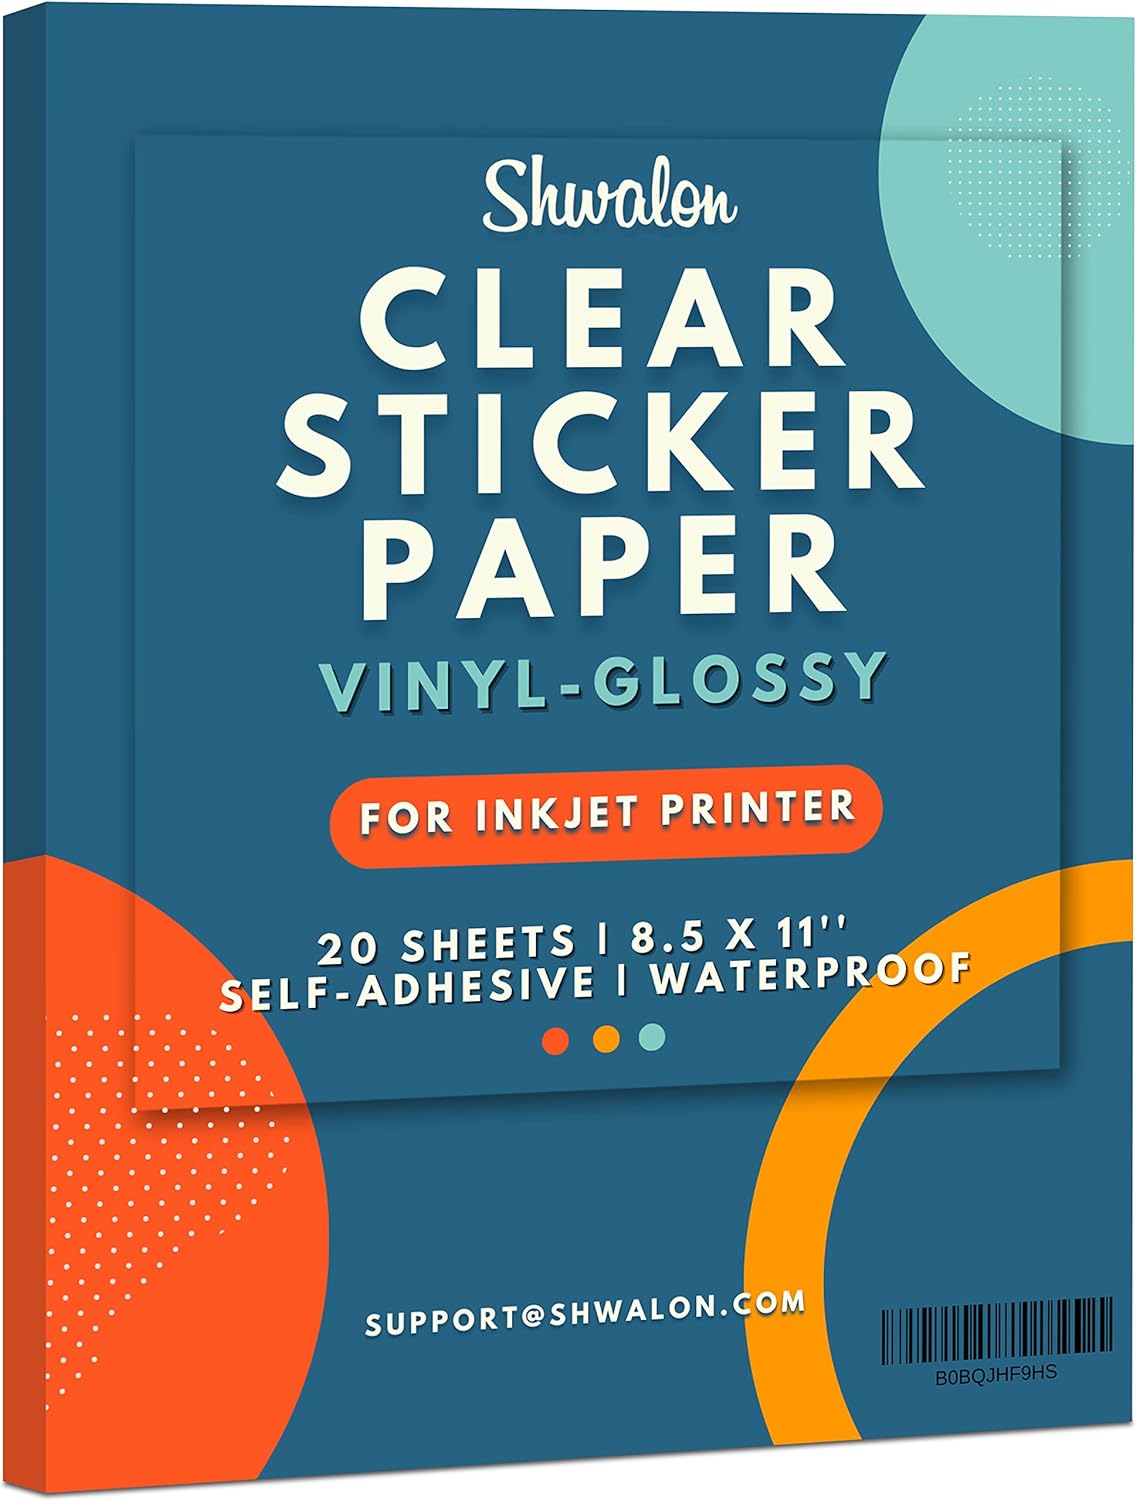 Glossy Sticker Paper - Inkjet Photo Paper - 8.5x11 (100 pack) - LD Products